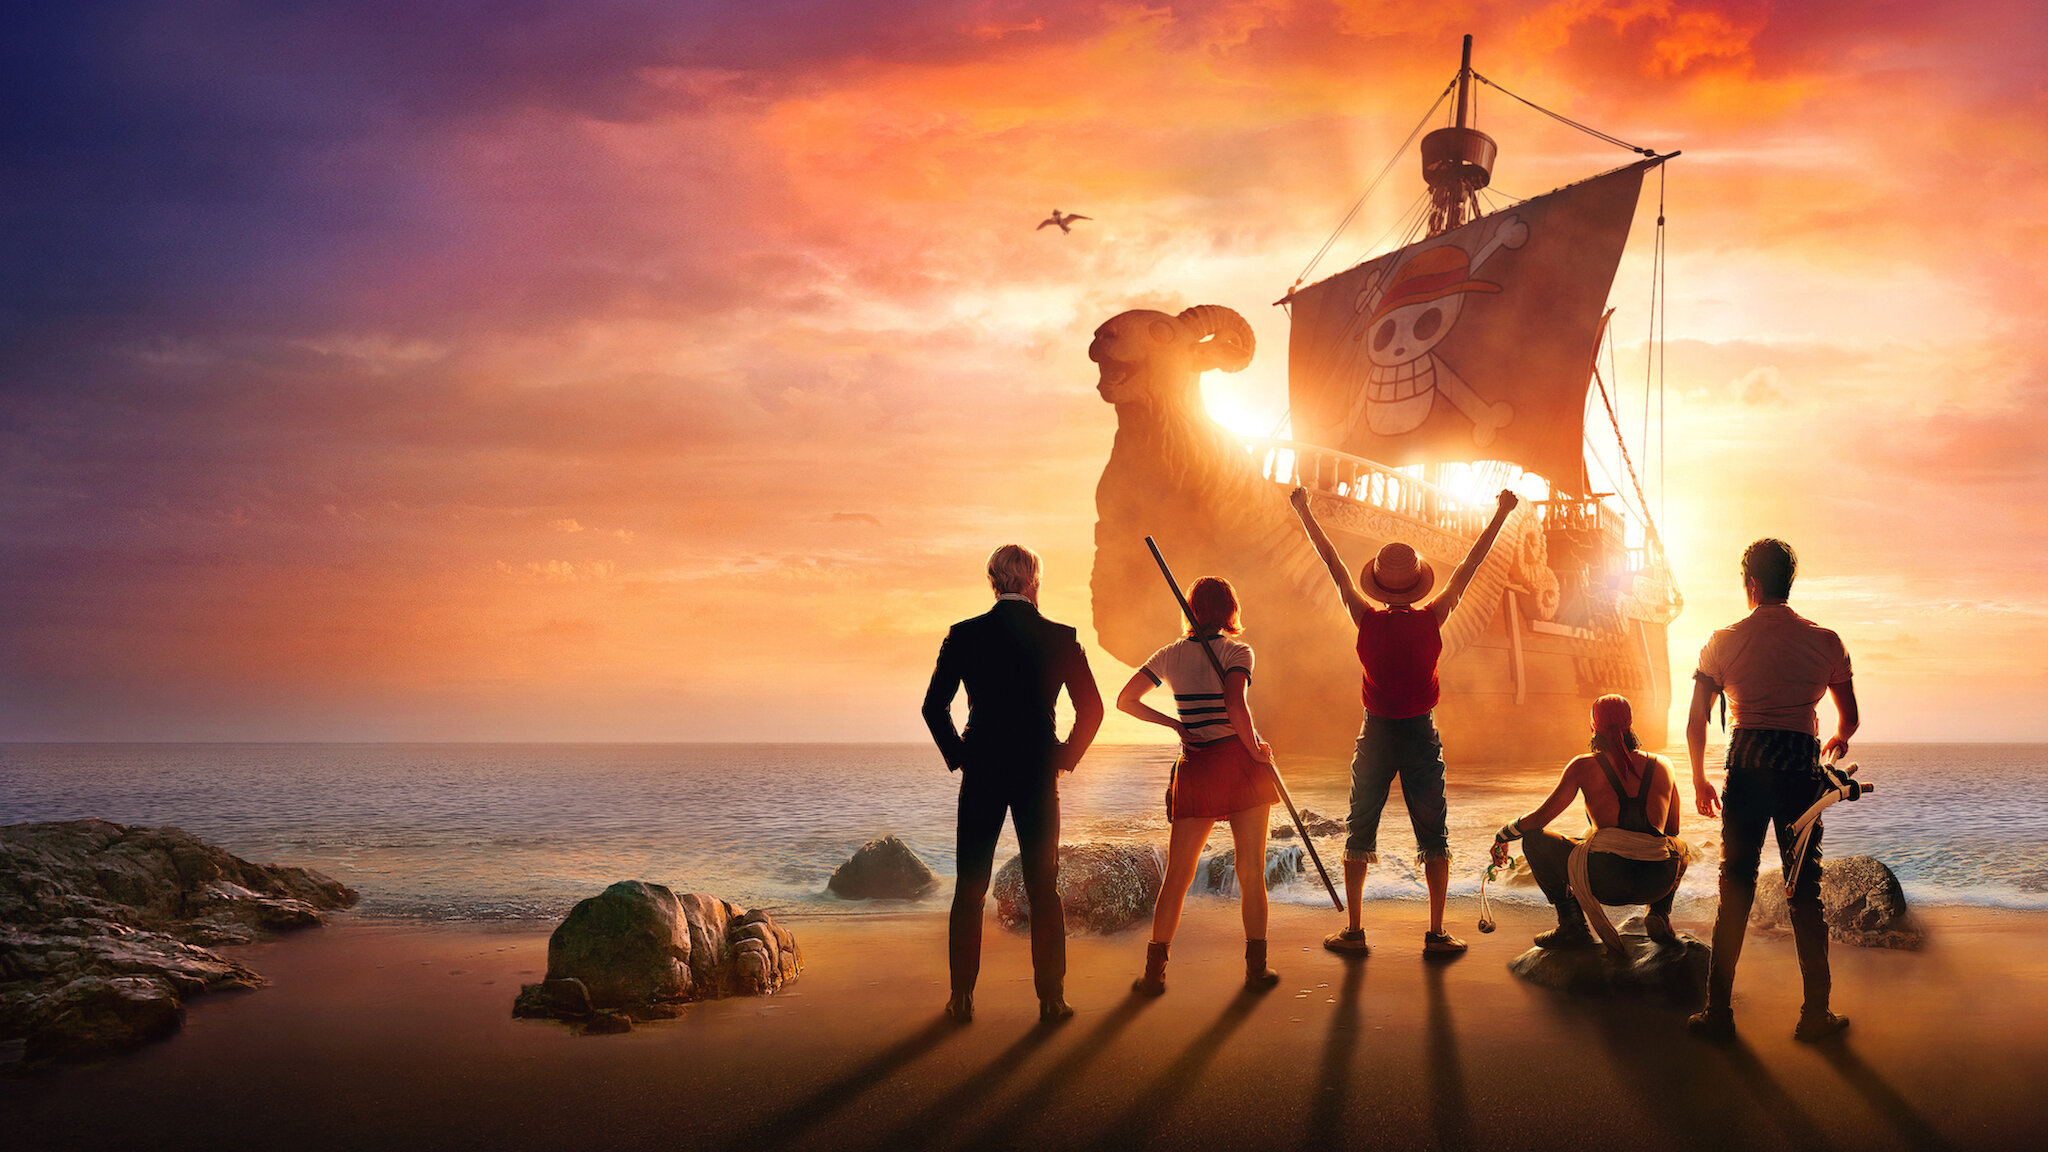 one peice netflix series in south africa - "One Piece" Netflix’s Pirate Adventure Series Shot in South Africa To Debut in 2023